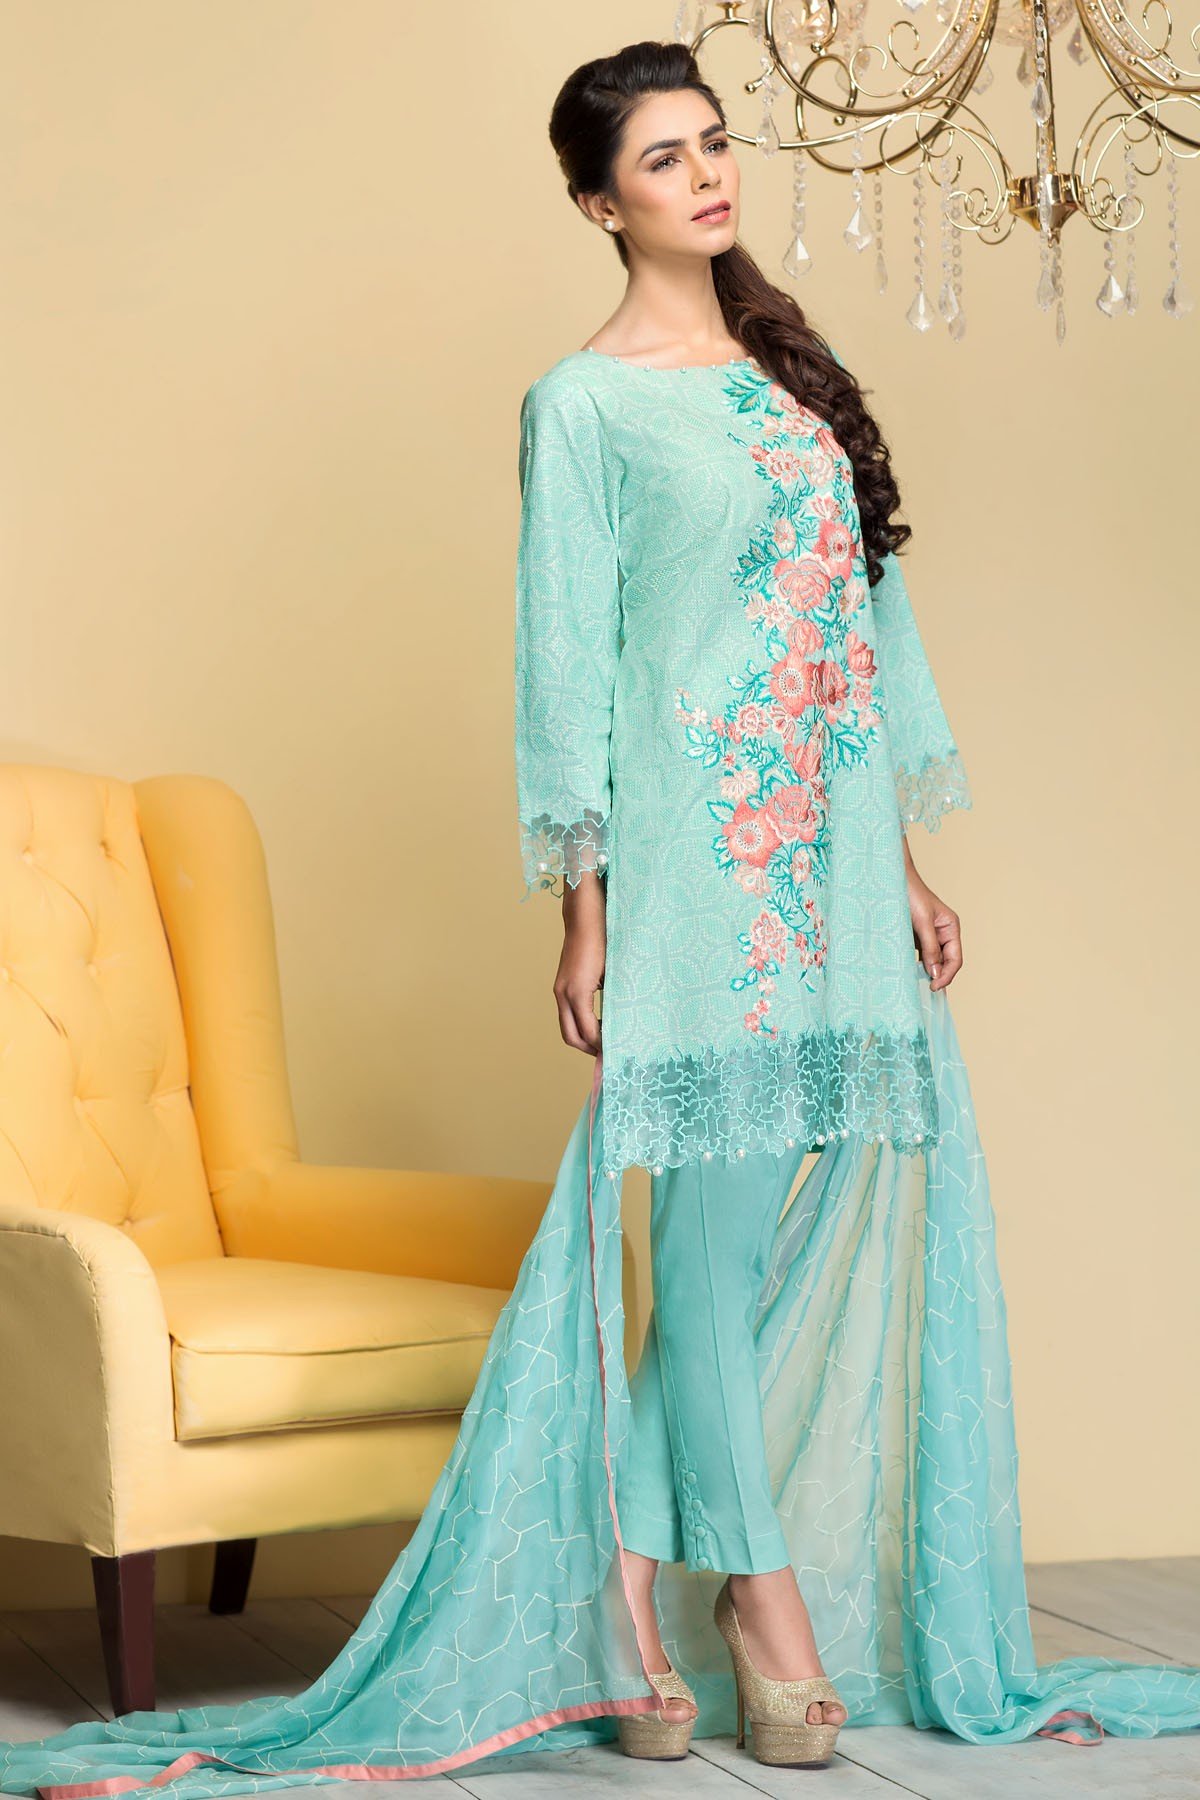 Mausummery Best Lawn Dresses Spring Summer 2016-2017 Collection (4)